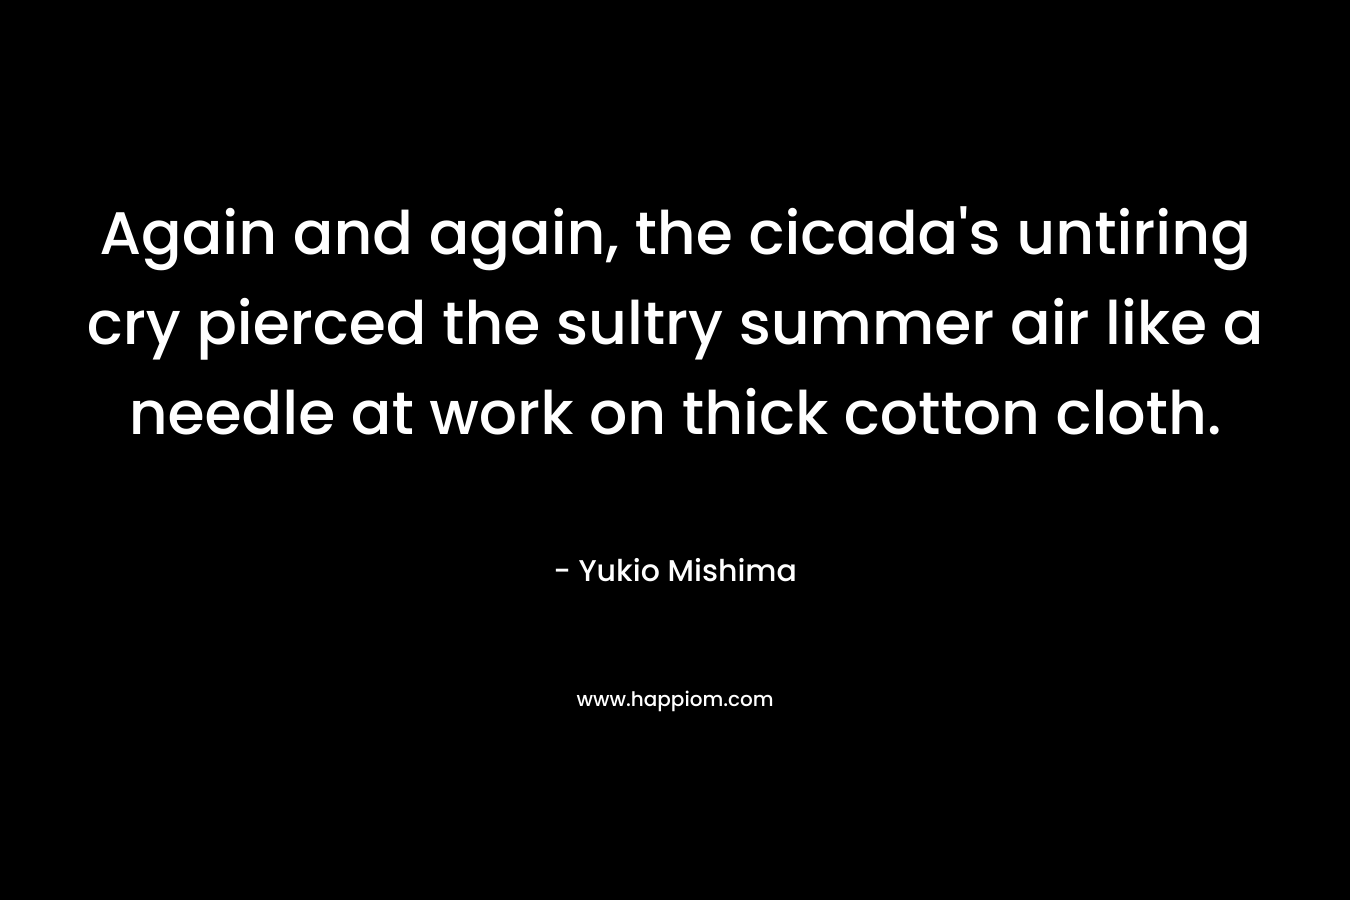 Again and again, the cicada’s untiring cry pierced the sultry summer air like a needle at work on thick cotton cloth. – Yukio Mishima